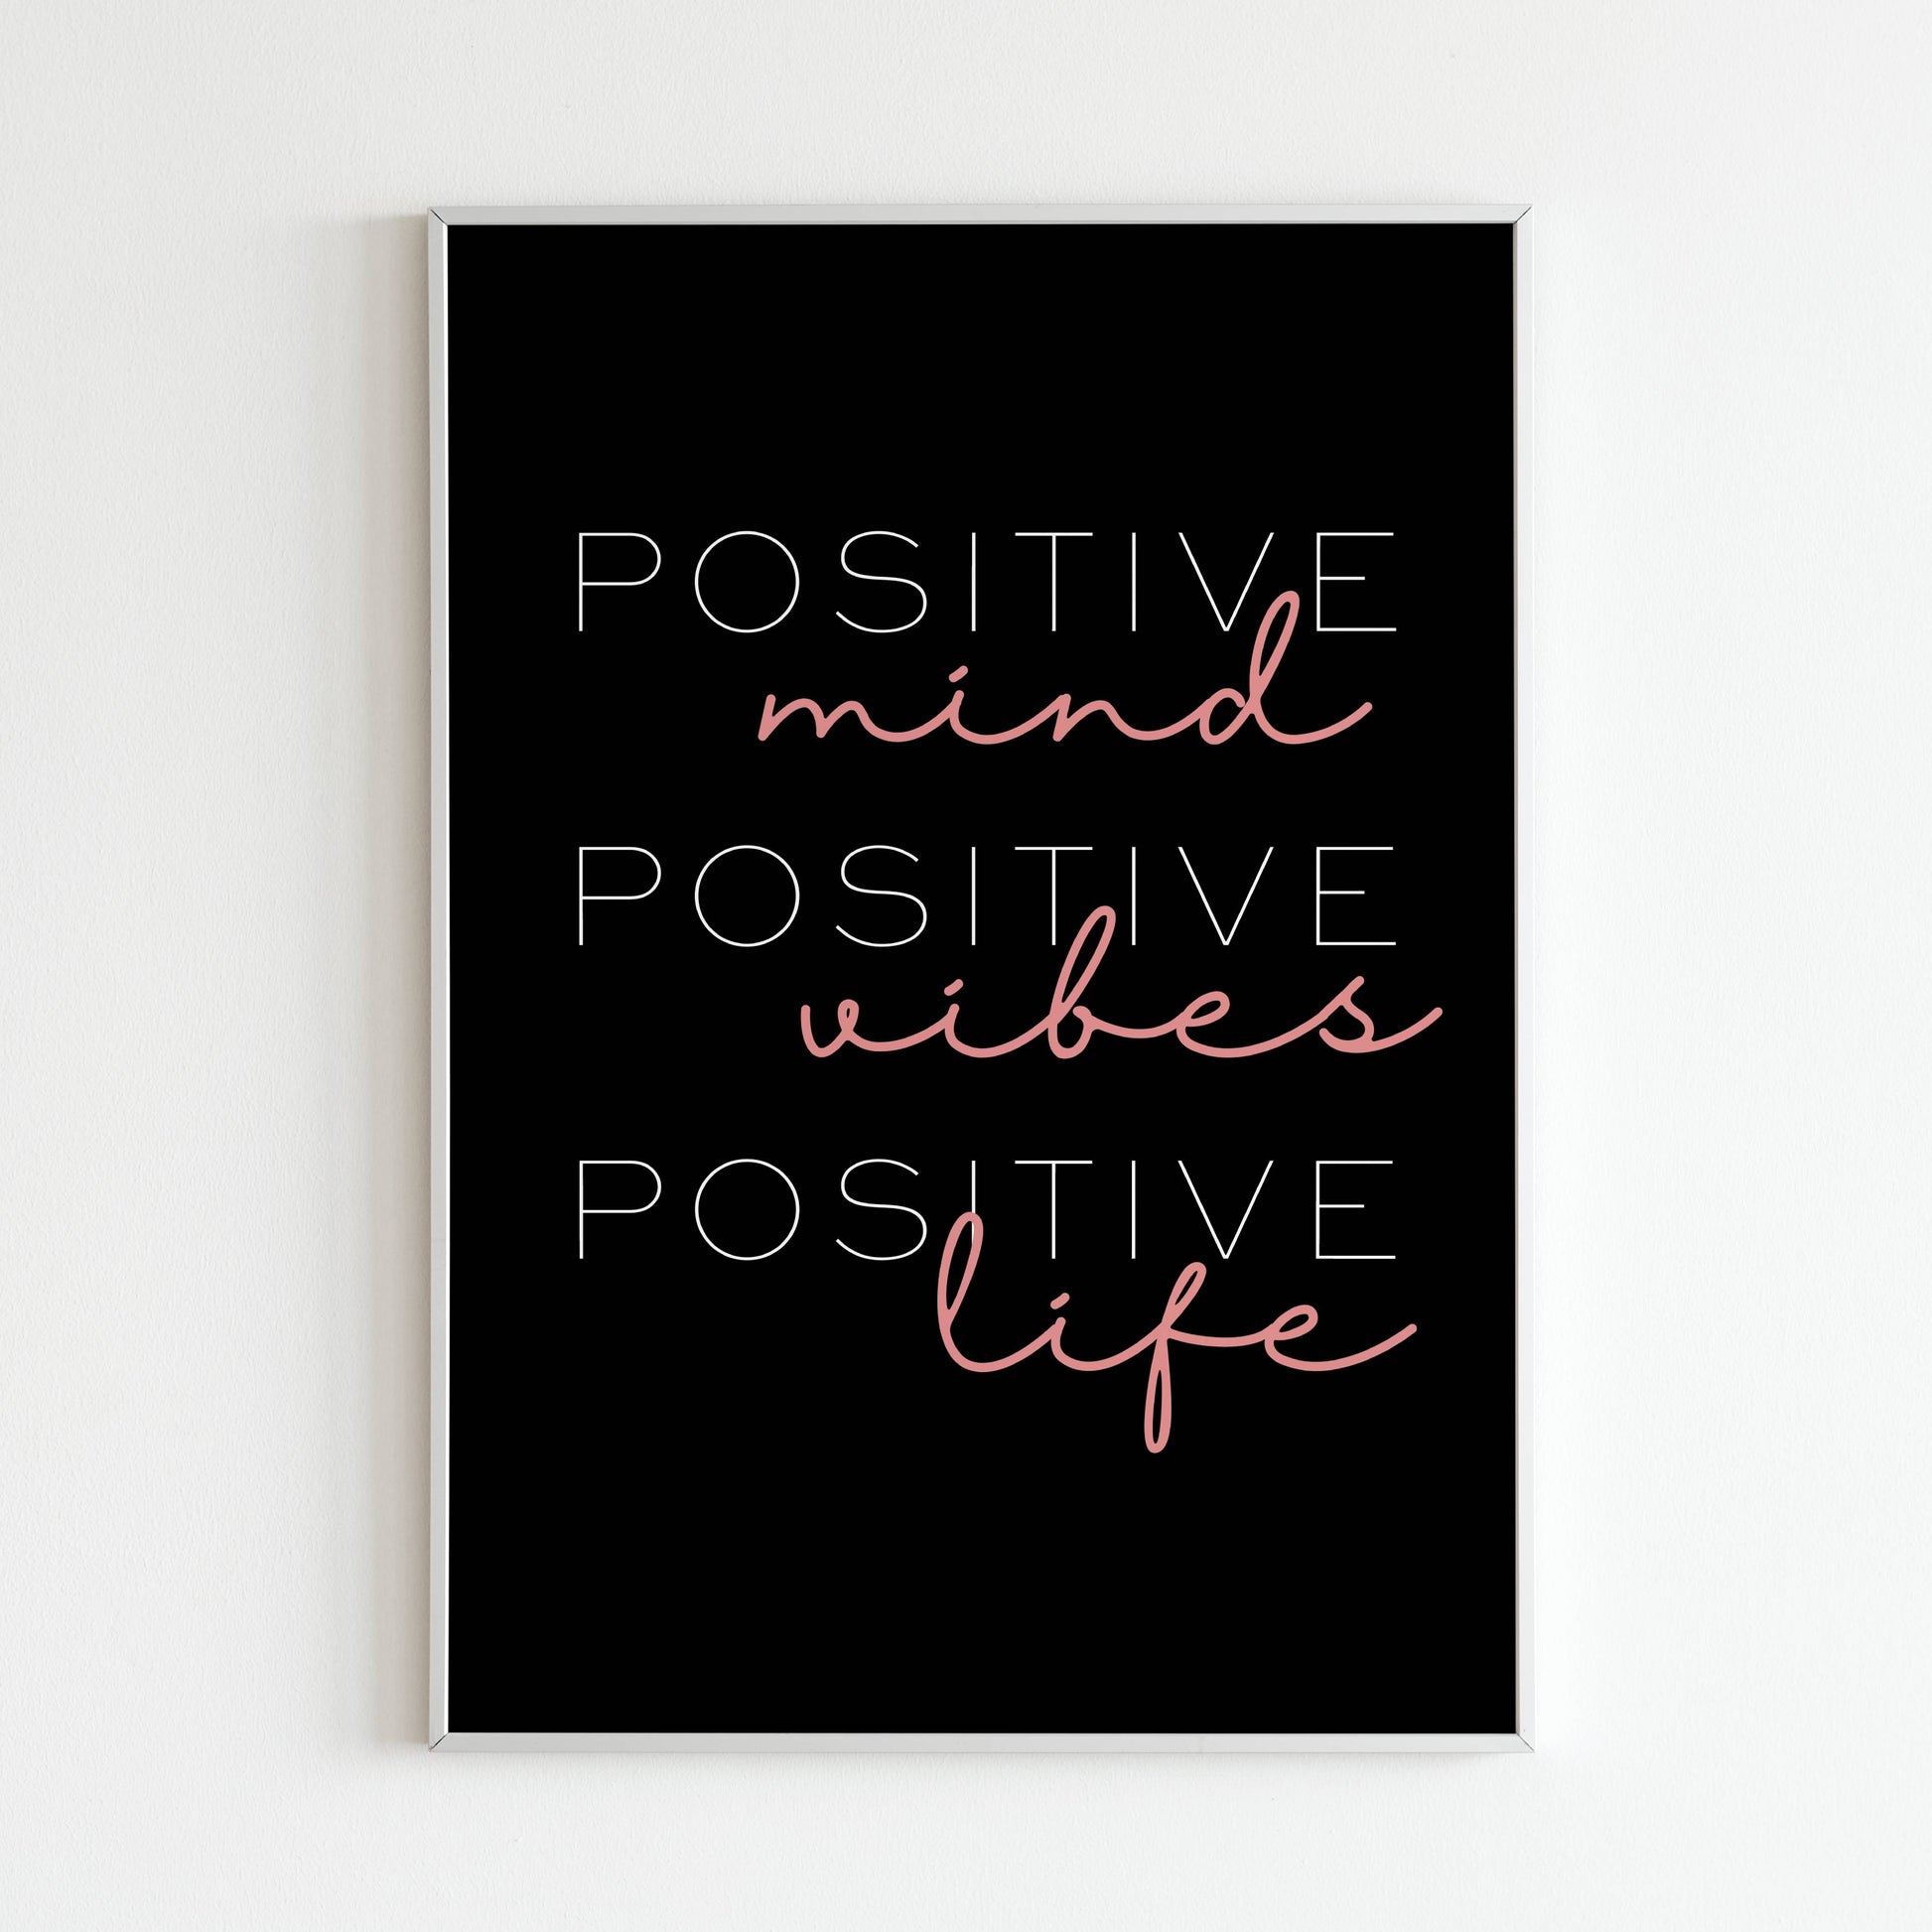 Downloadable "Positive mind, positive vibes, positive life" wall art for attracting positivity.